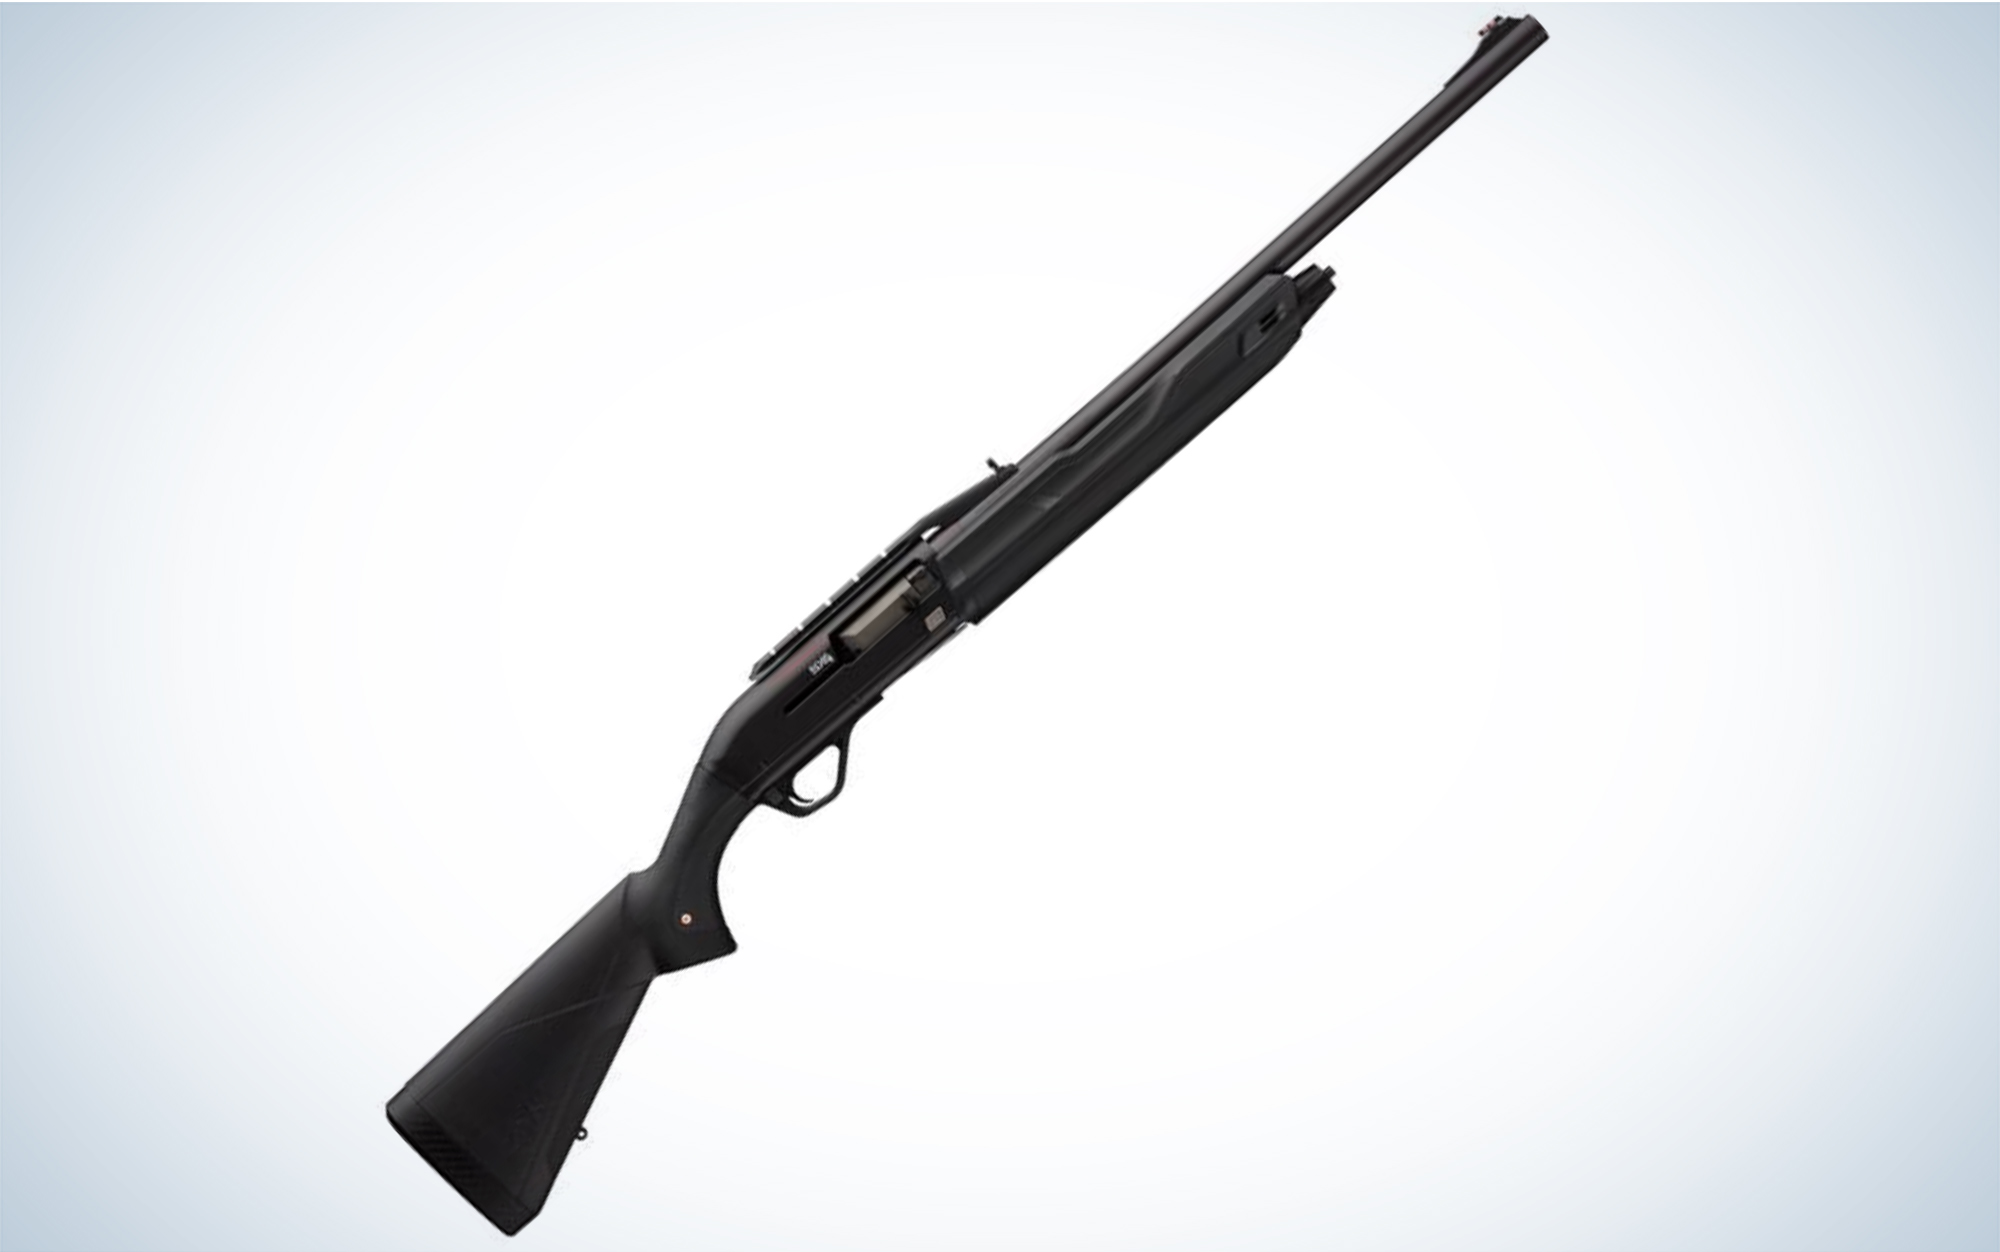 The Winchester SX4 Cantilever Buck is the best semi auto shotgun for deer.